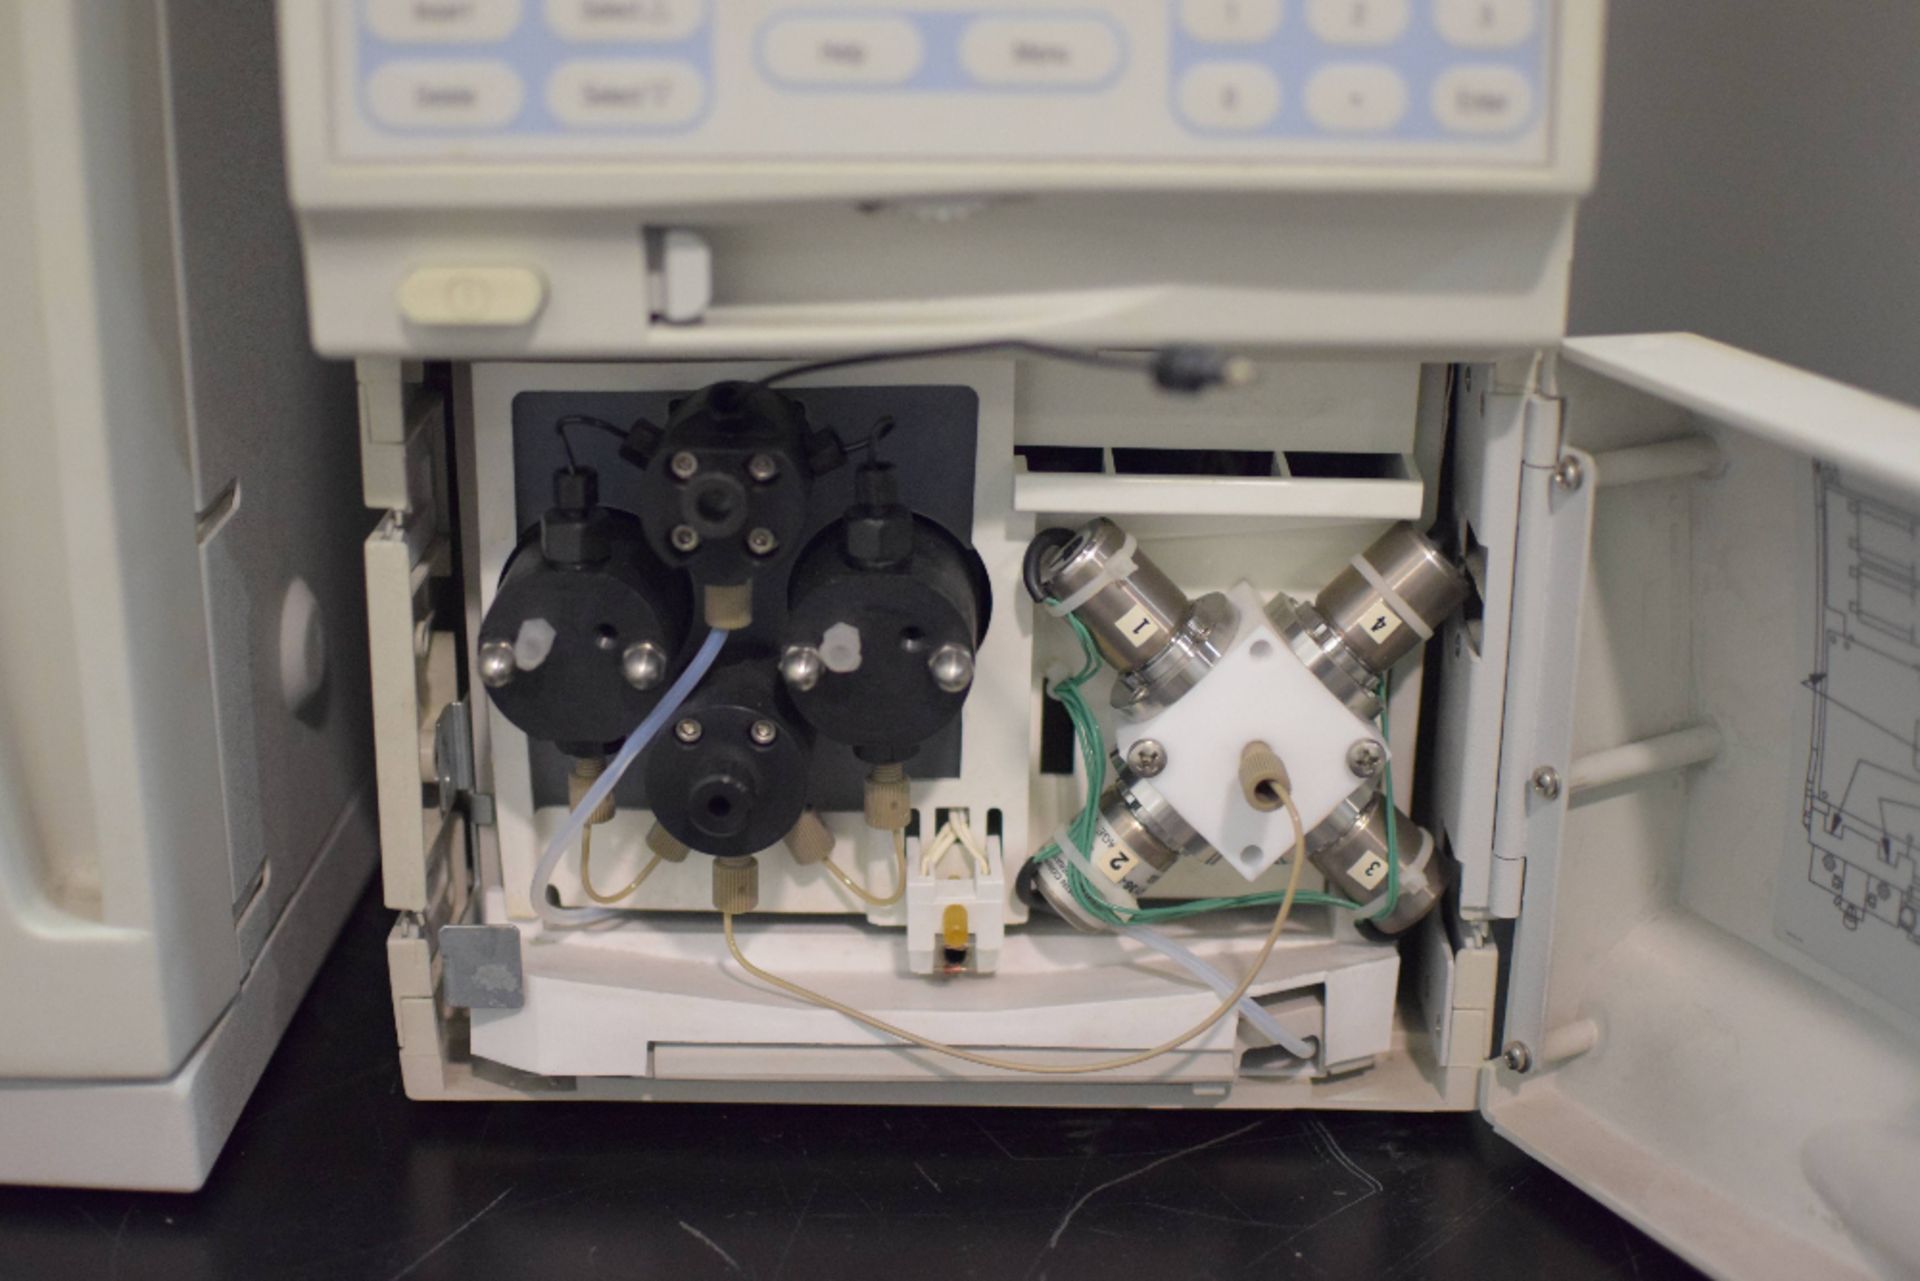 Dionex Ion Chromatography System - Image 6 of 7